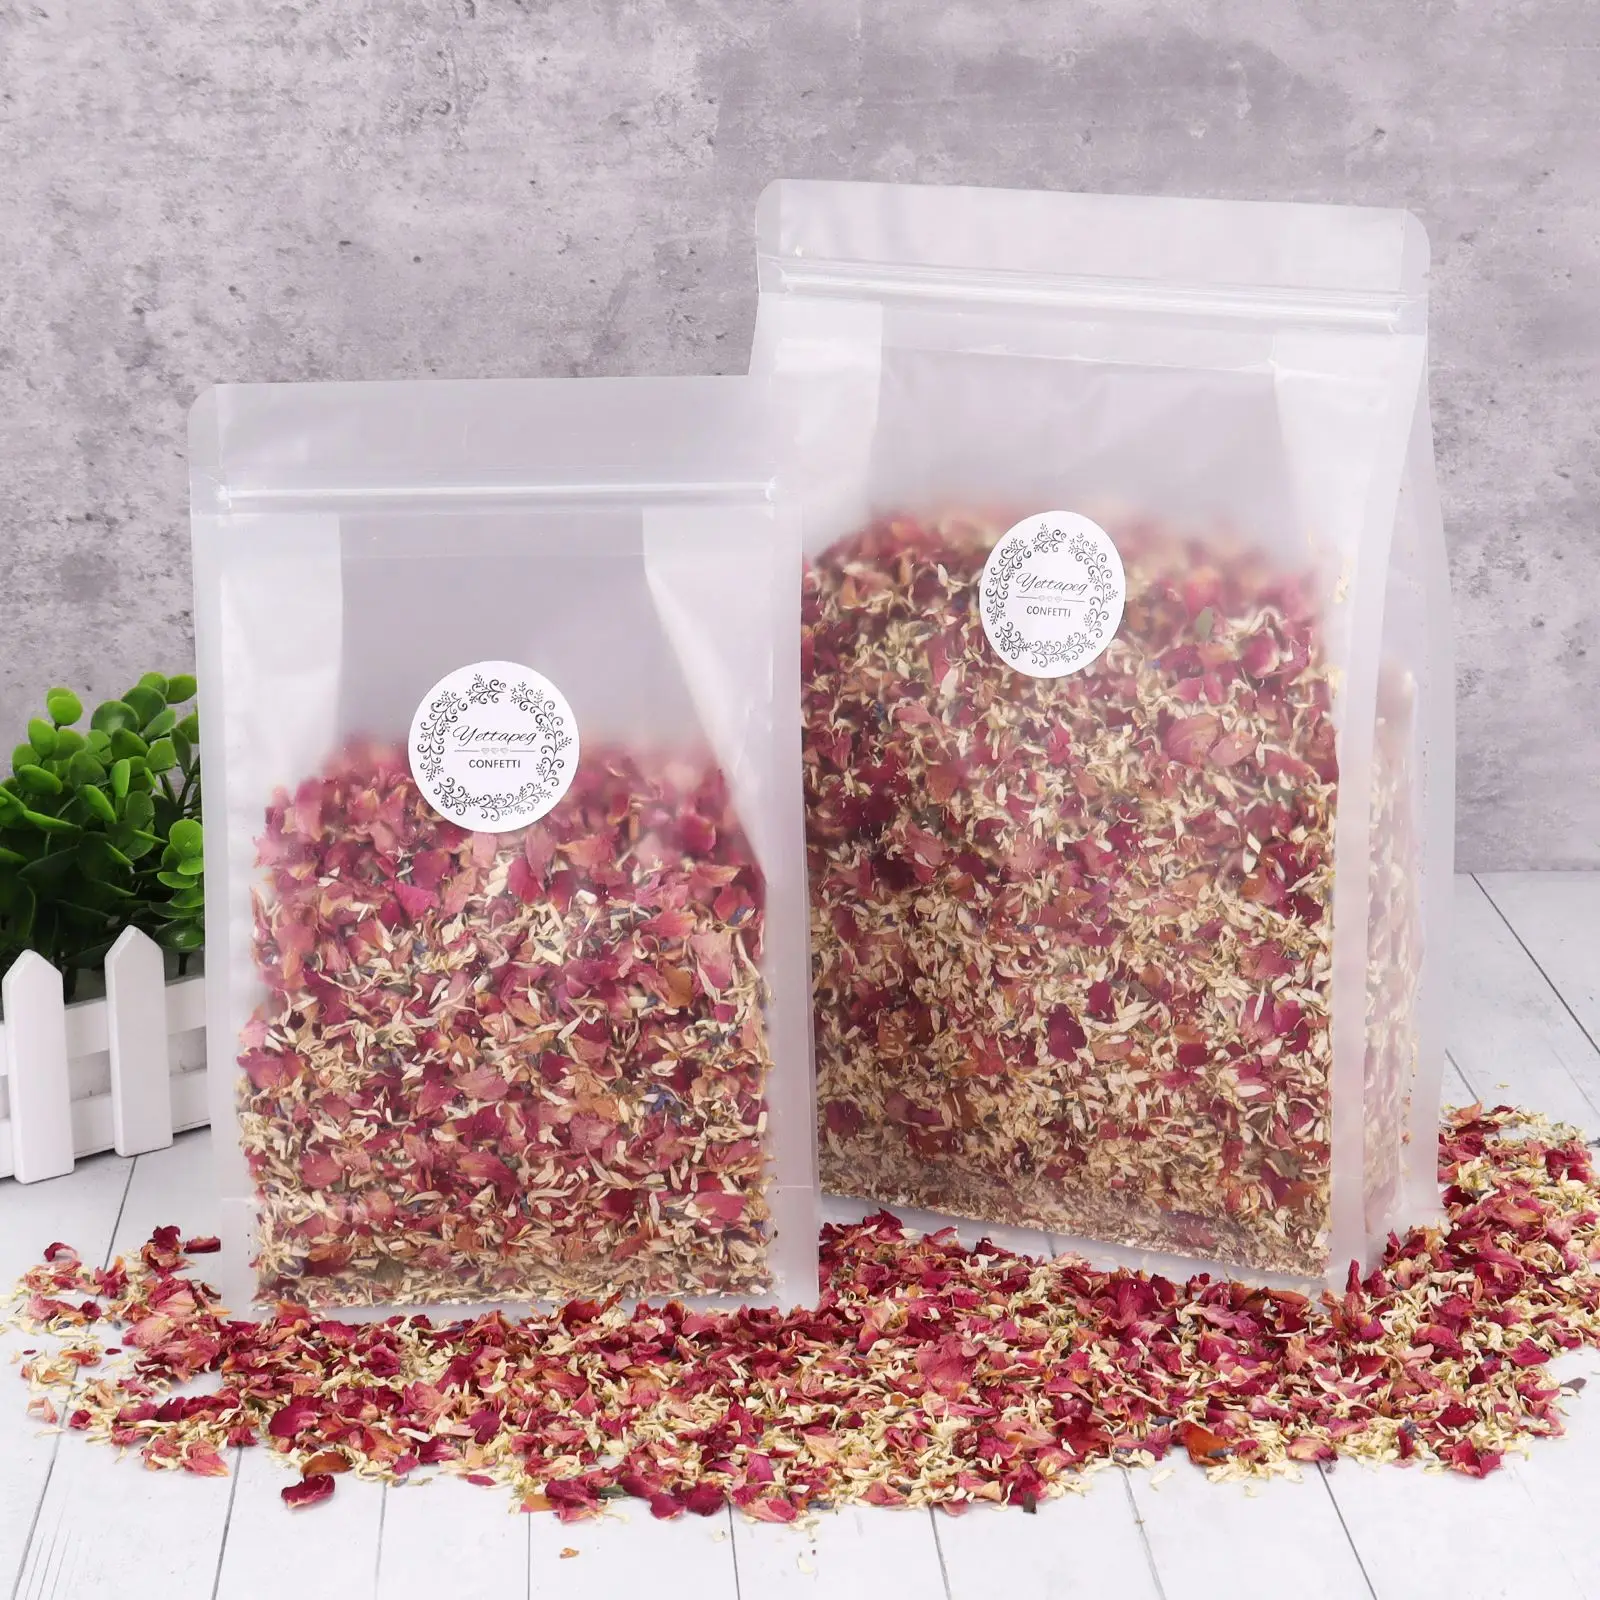 100/200g Natural Dried Flower Rose Petals Pop Wedding Confetti Birthday Party DIY Decoration Biodegradable Handmade Party